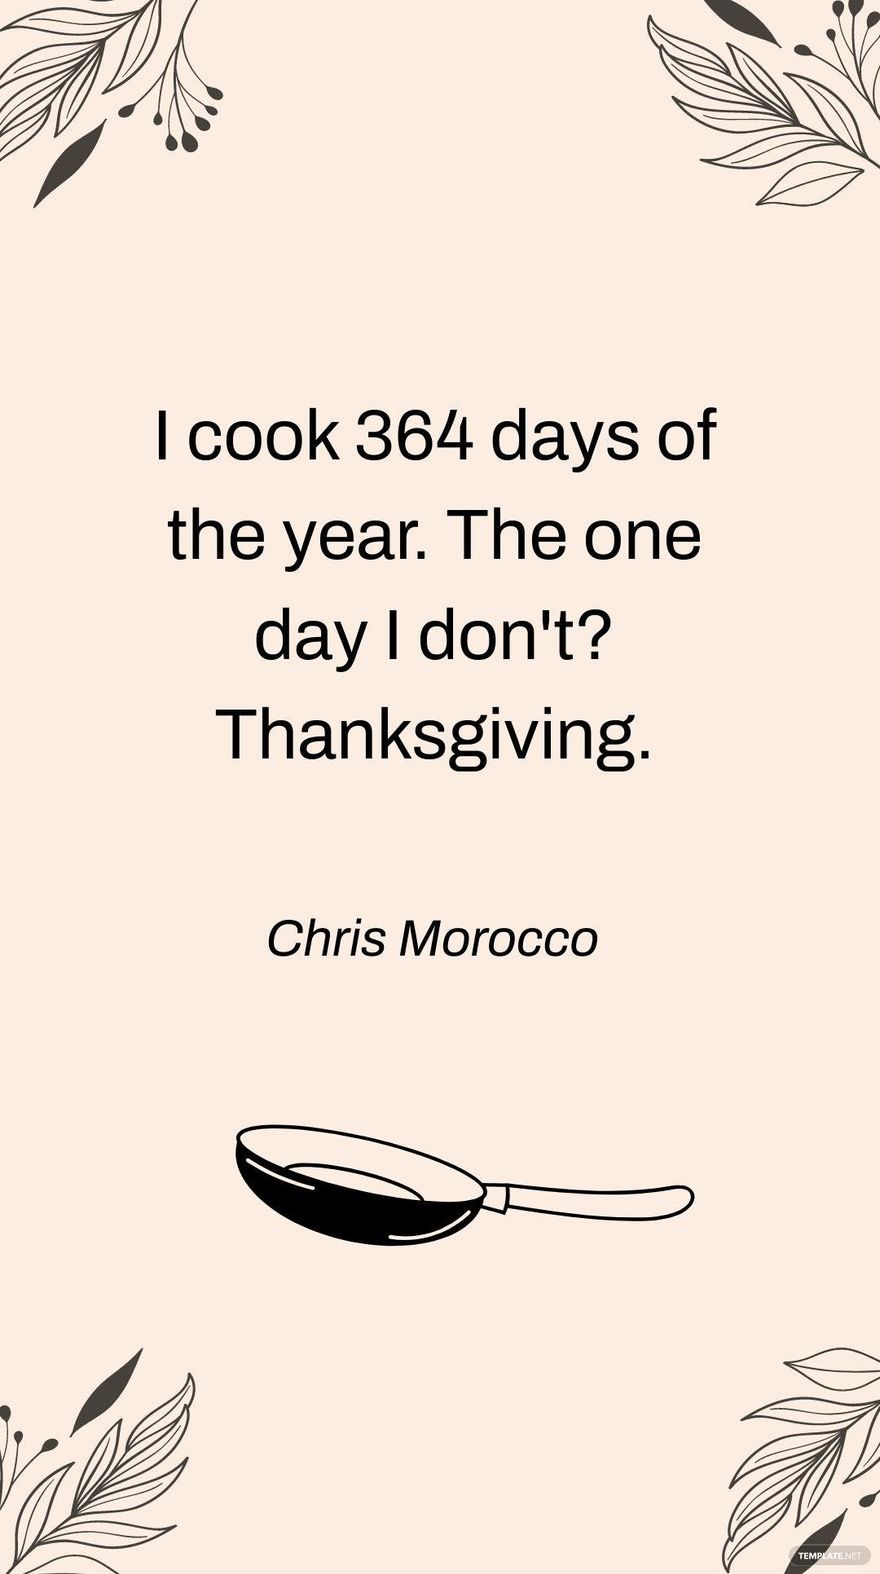 Free Chris Morocco - I cook 364 days of the year. The one day I don't? Thanksgiving.